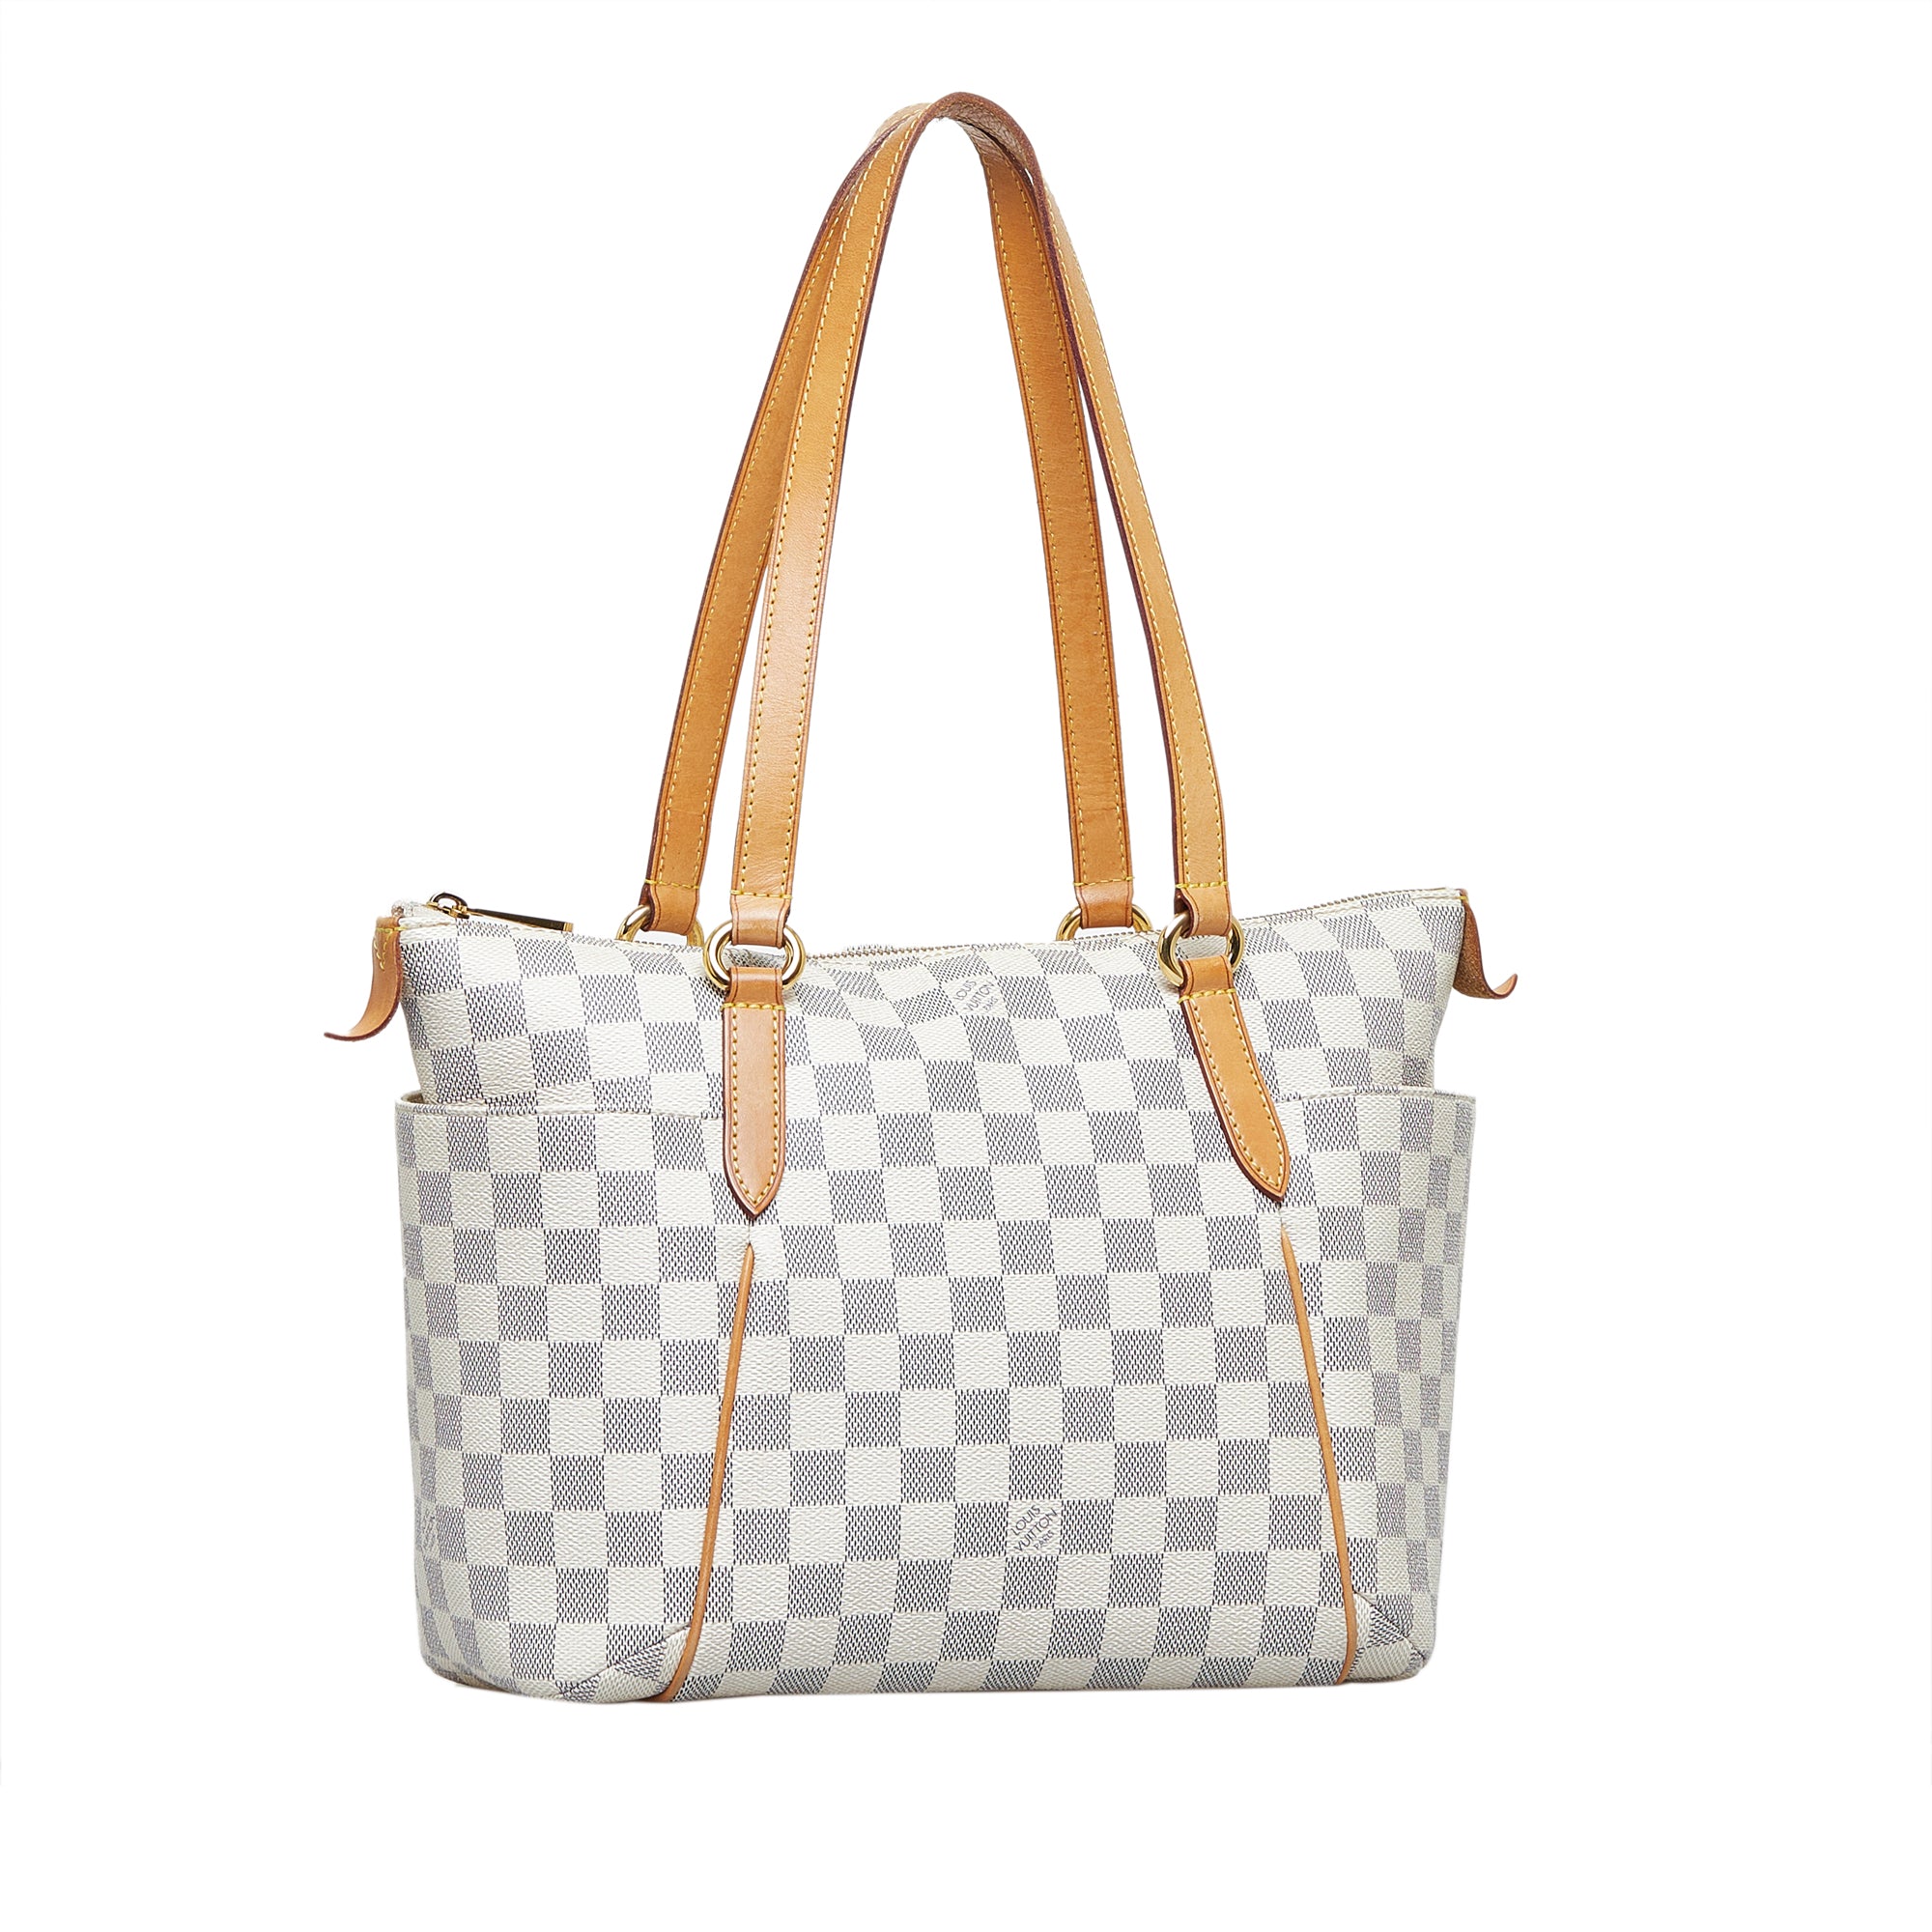 What fits inside my Totally PM in Damier Ebene 